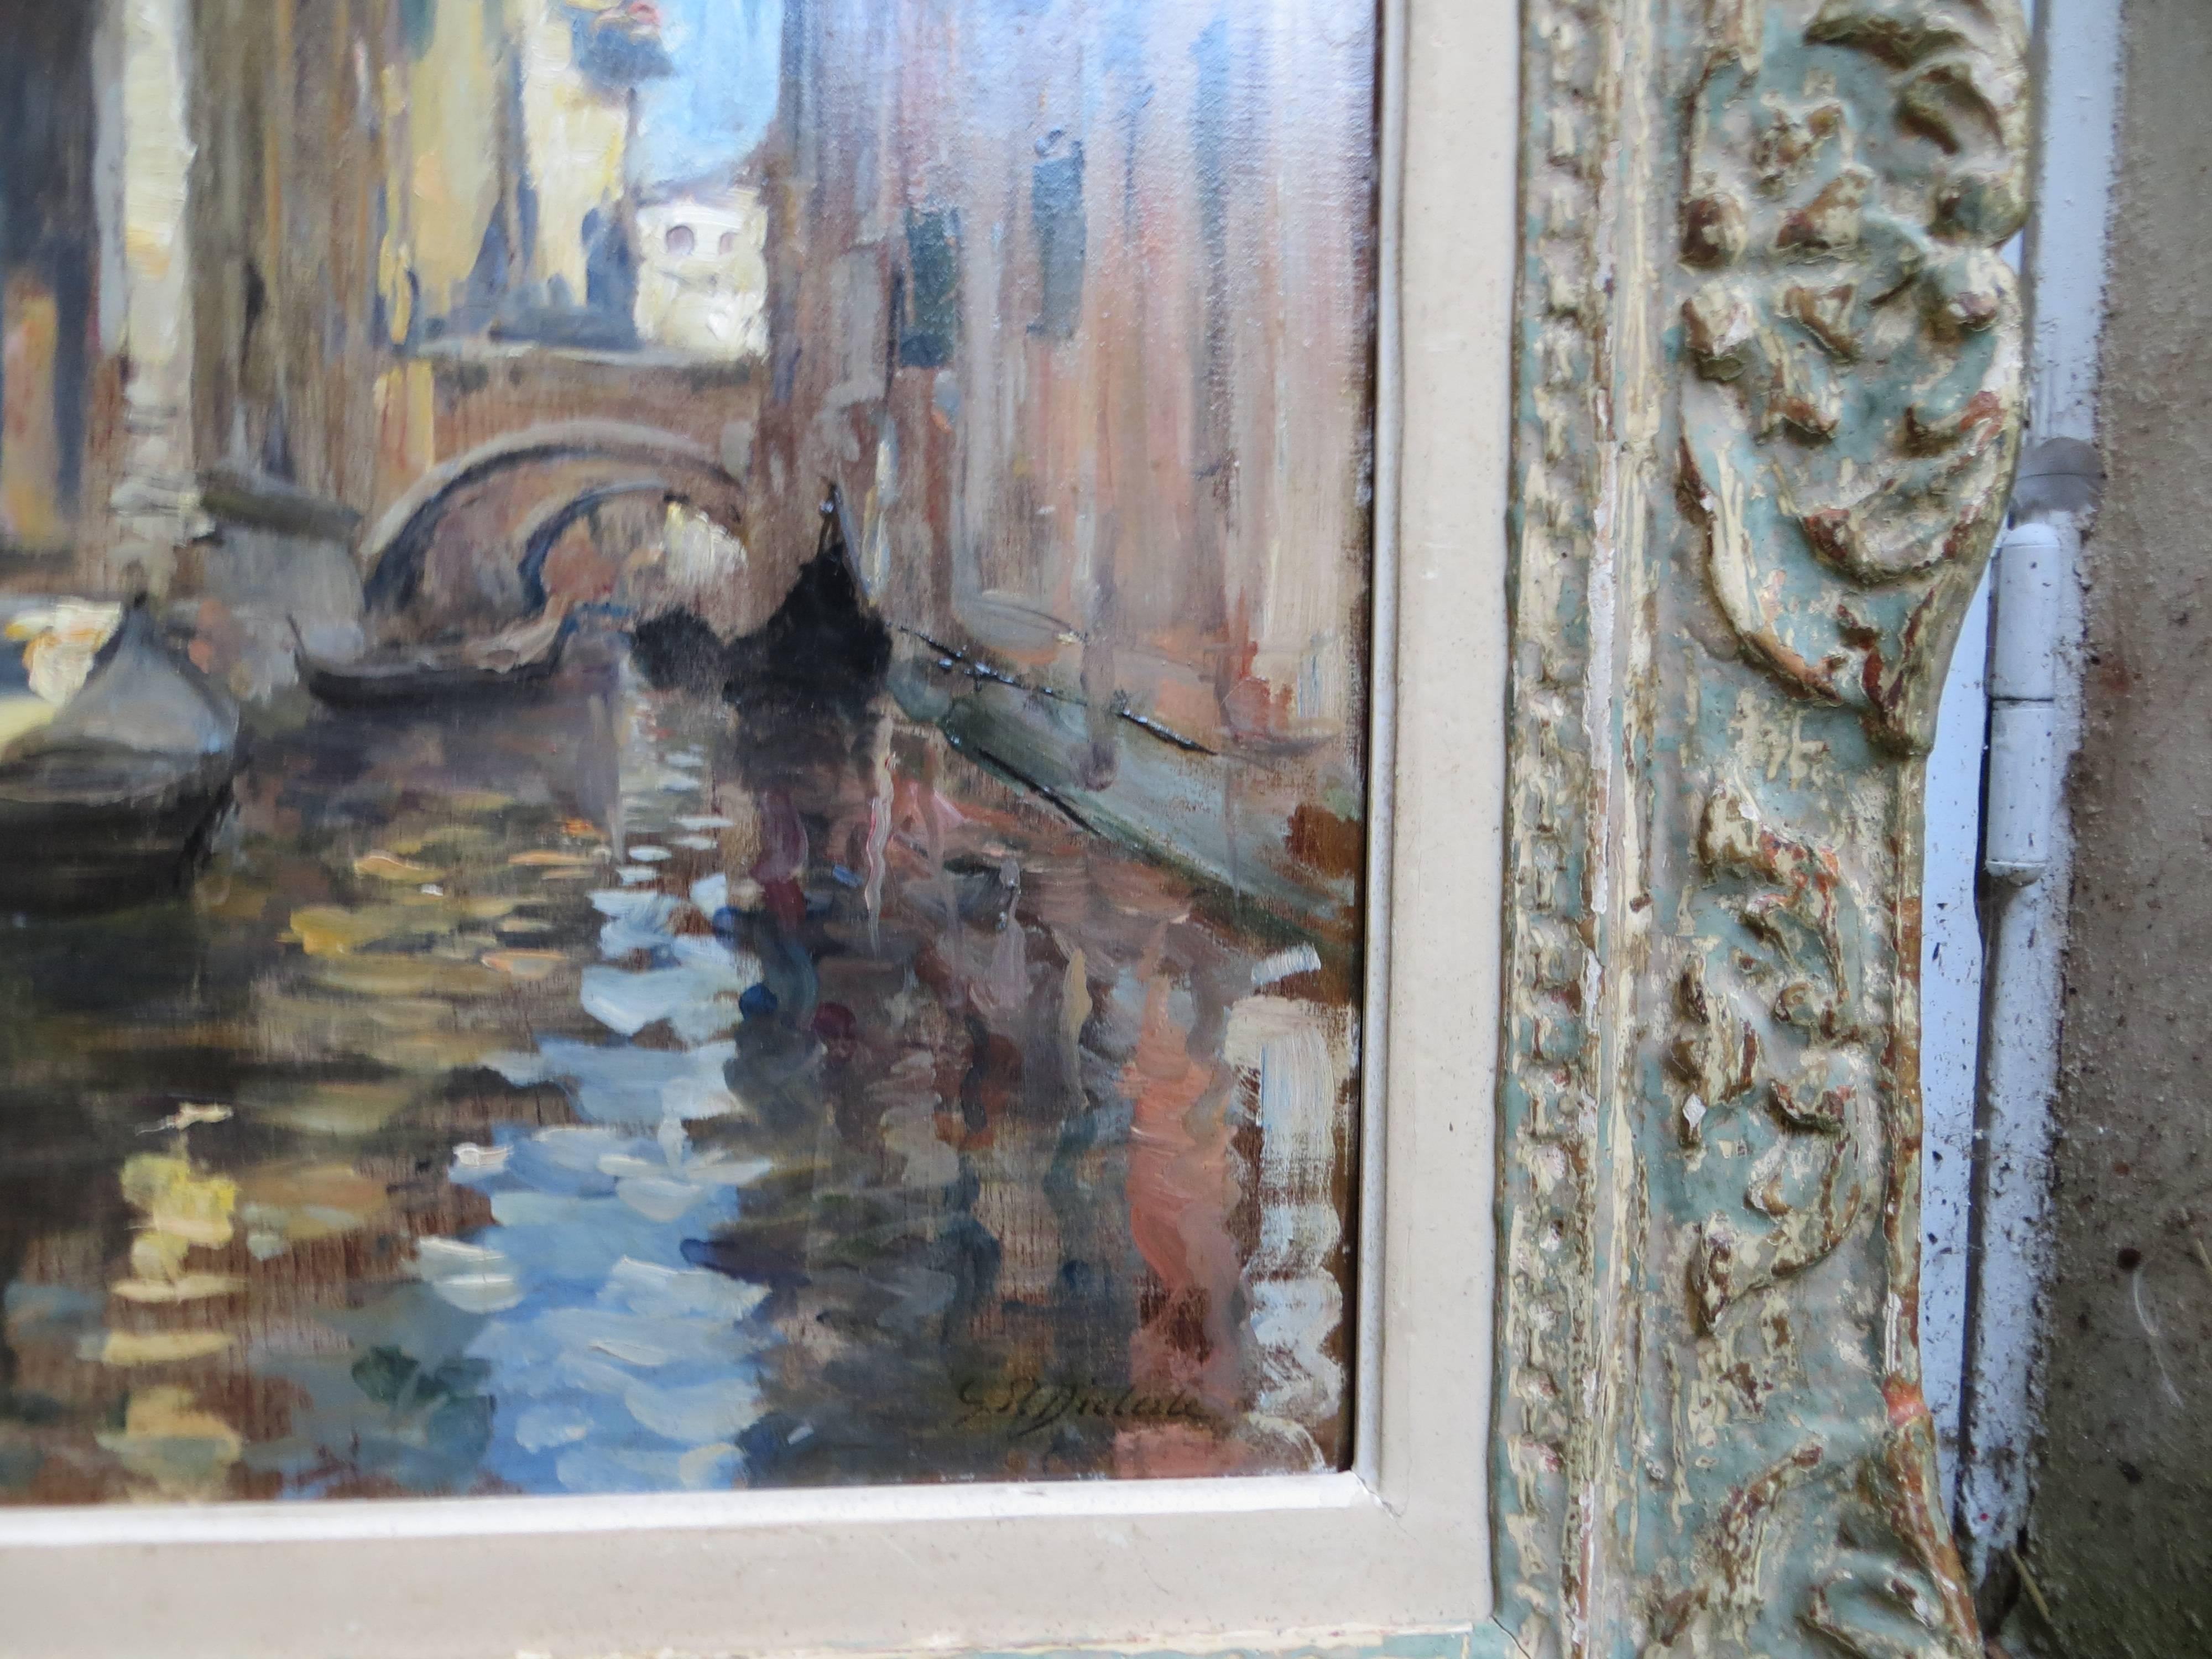 Canal in VENICE - Painting by Pierre Georges Dieterle